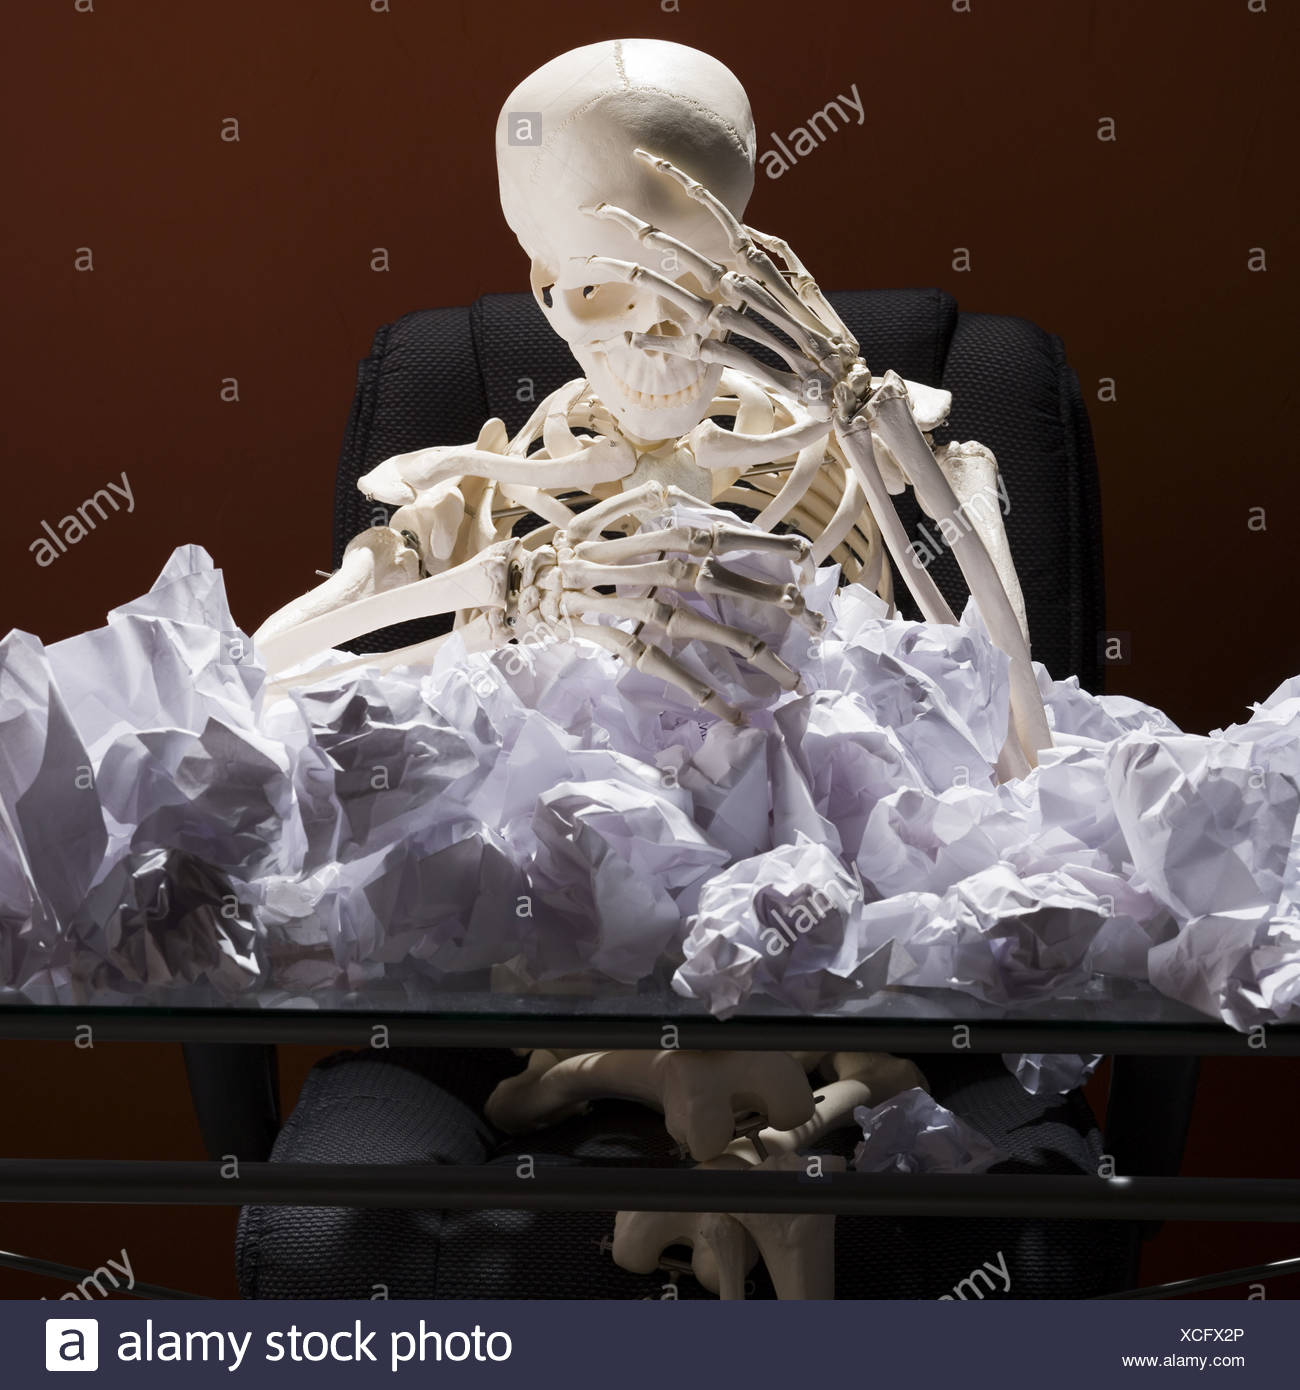 Skeleton Sitting At Desk With Crumpled Papers Stock Photo